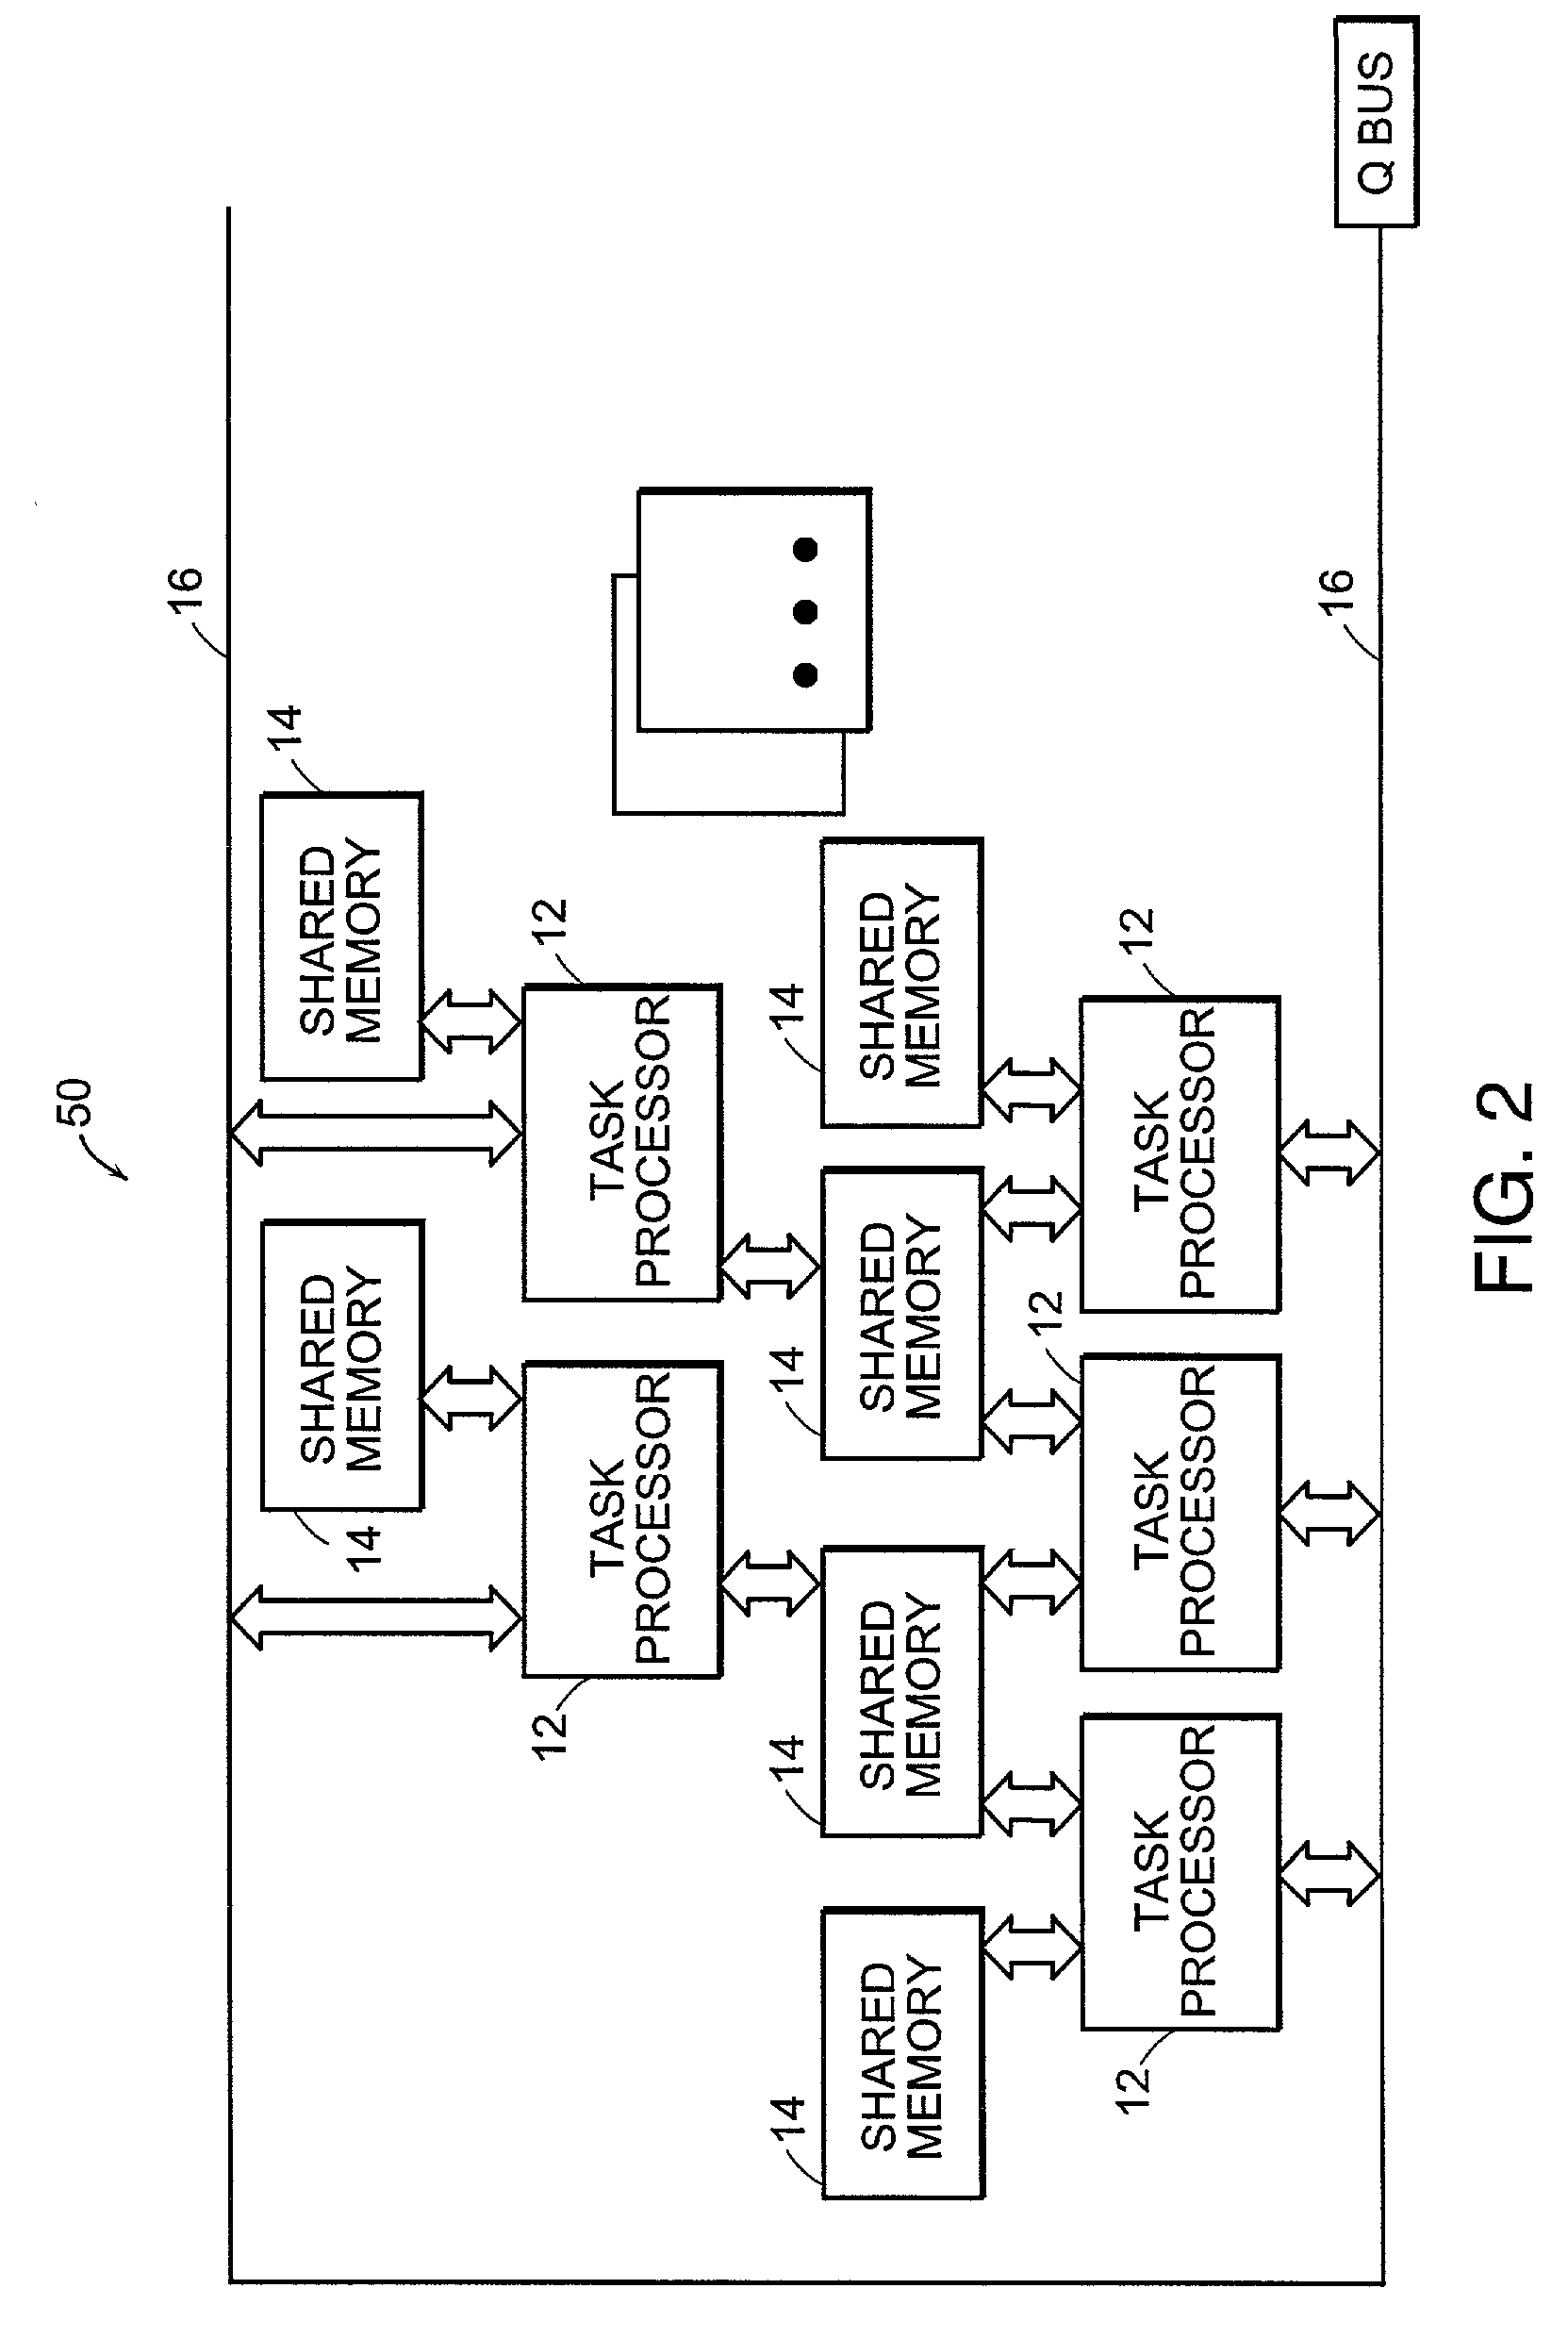 Compiler for multiple processor and distributed memory architectures